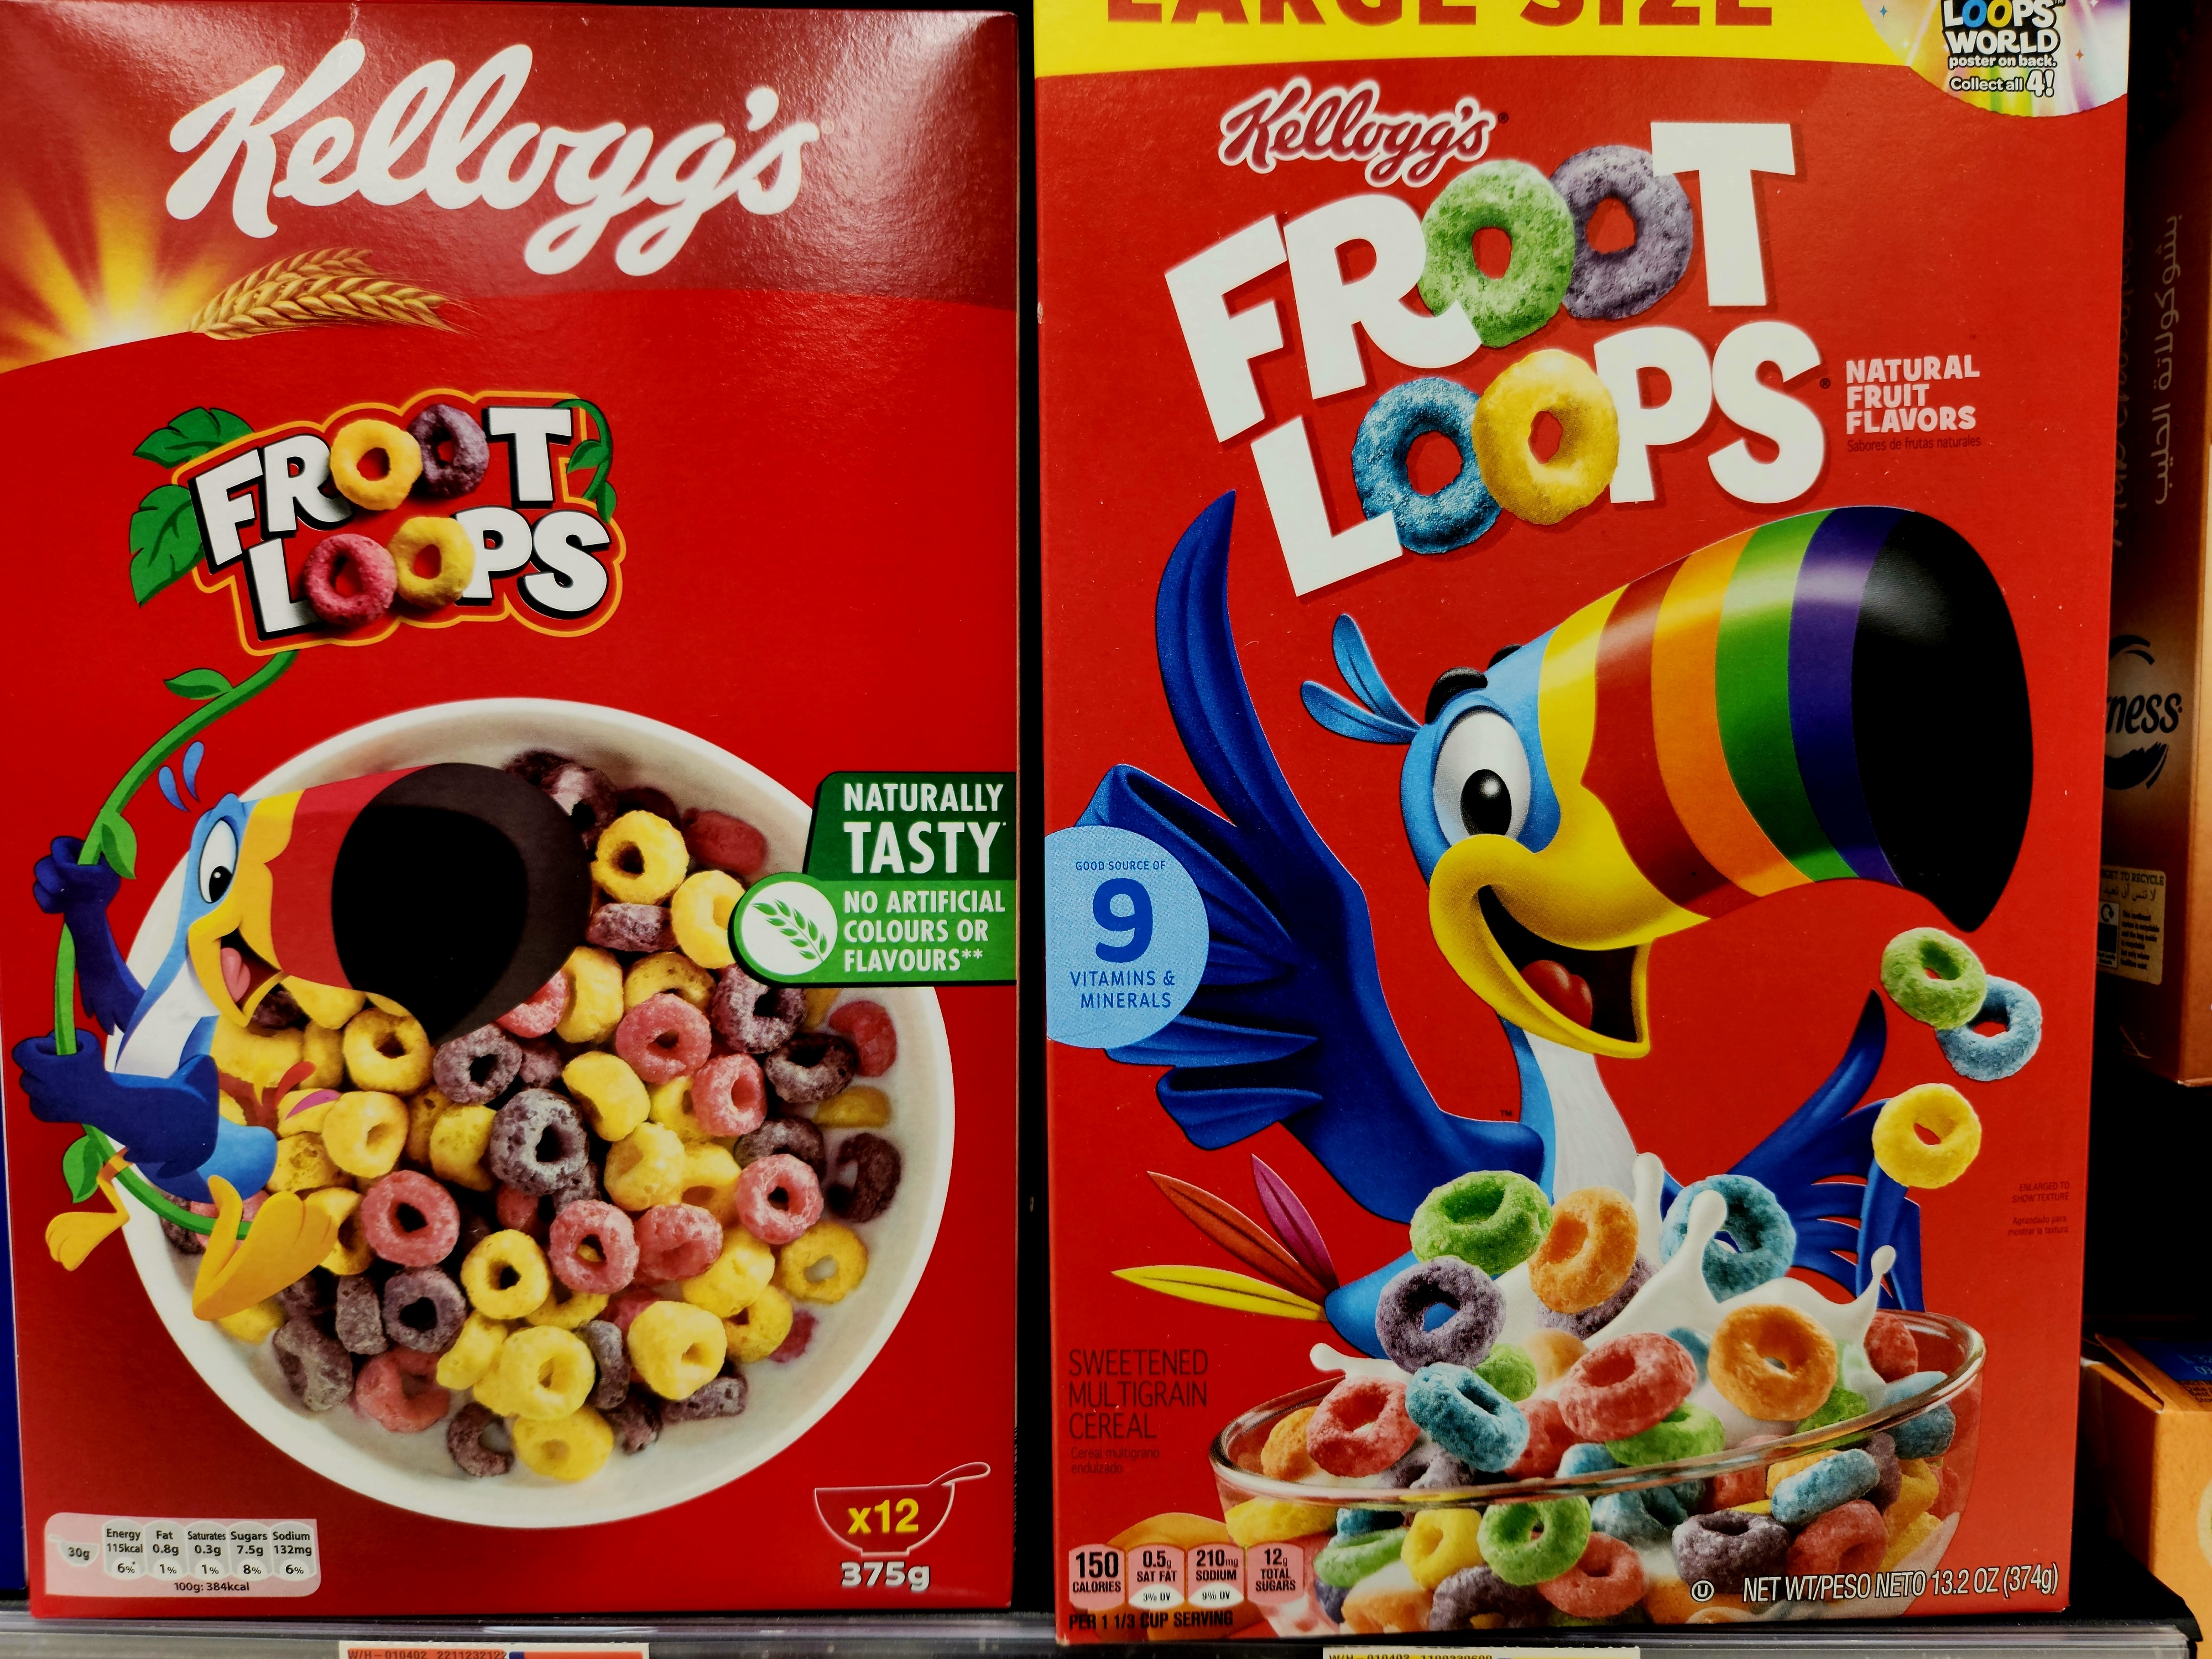 The non-US box&#x27;s Loops are less pastel and varied (light yellow and shades of red and purple) than the US label (with green, blue, orange, purple, yellow, and red)